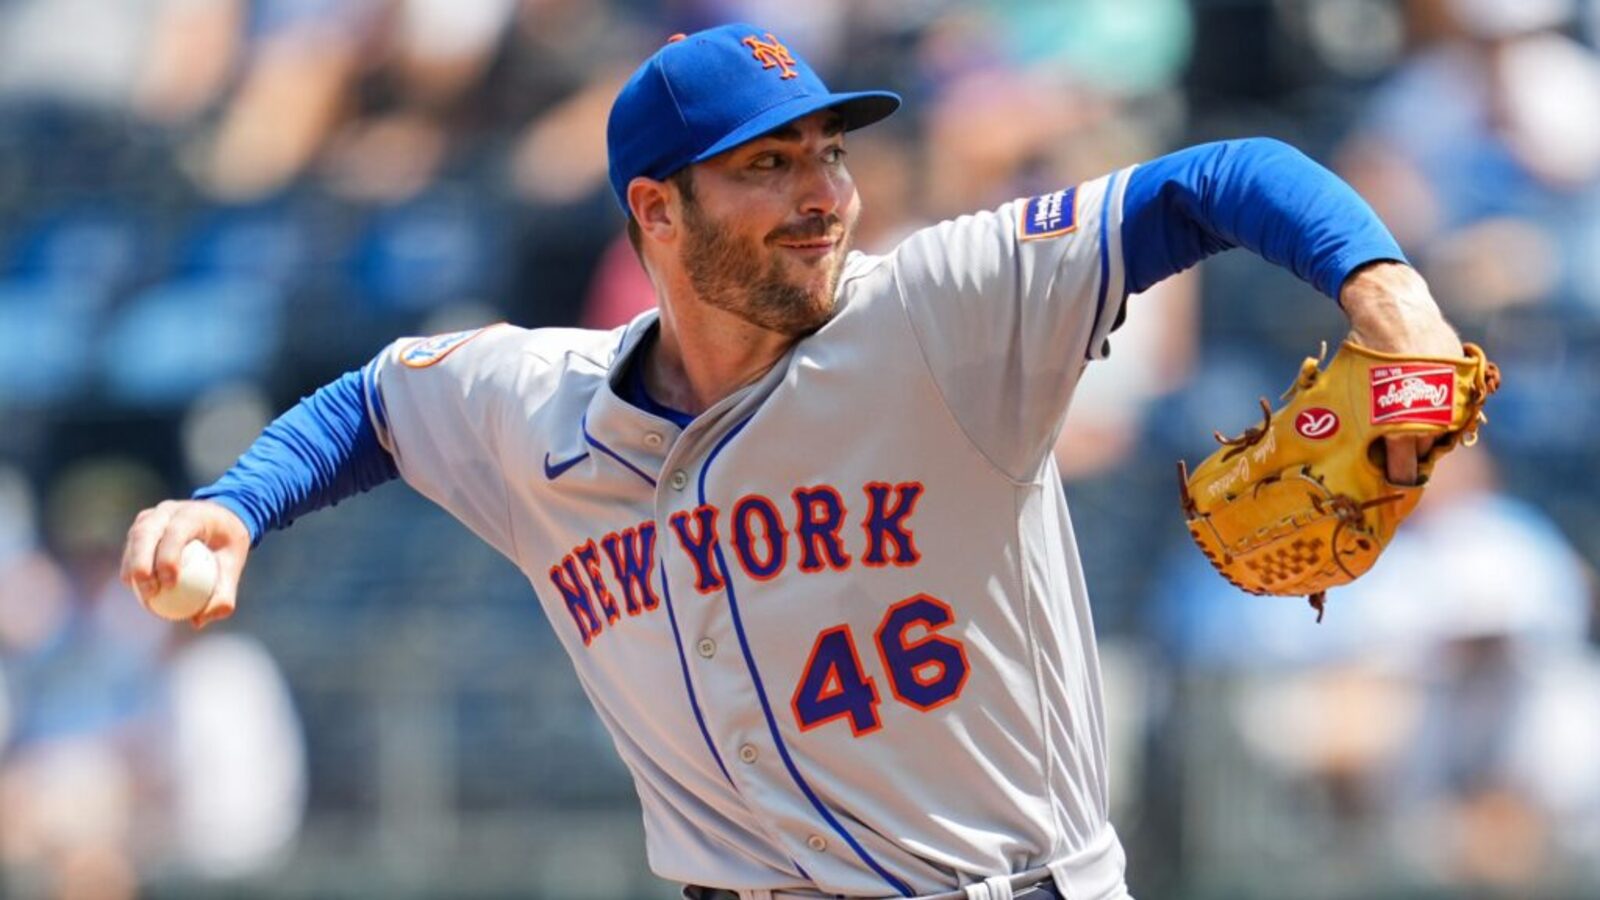 Six More Mets Roster Spots Are Opened Ahead of a Busy Winter | Yardbarker